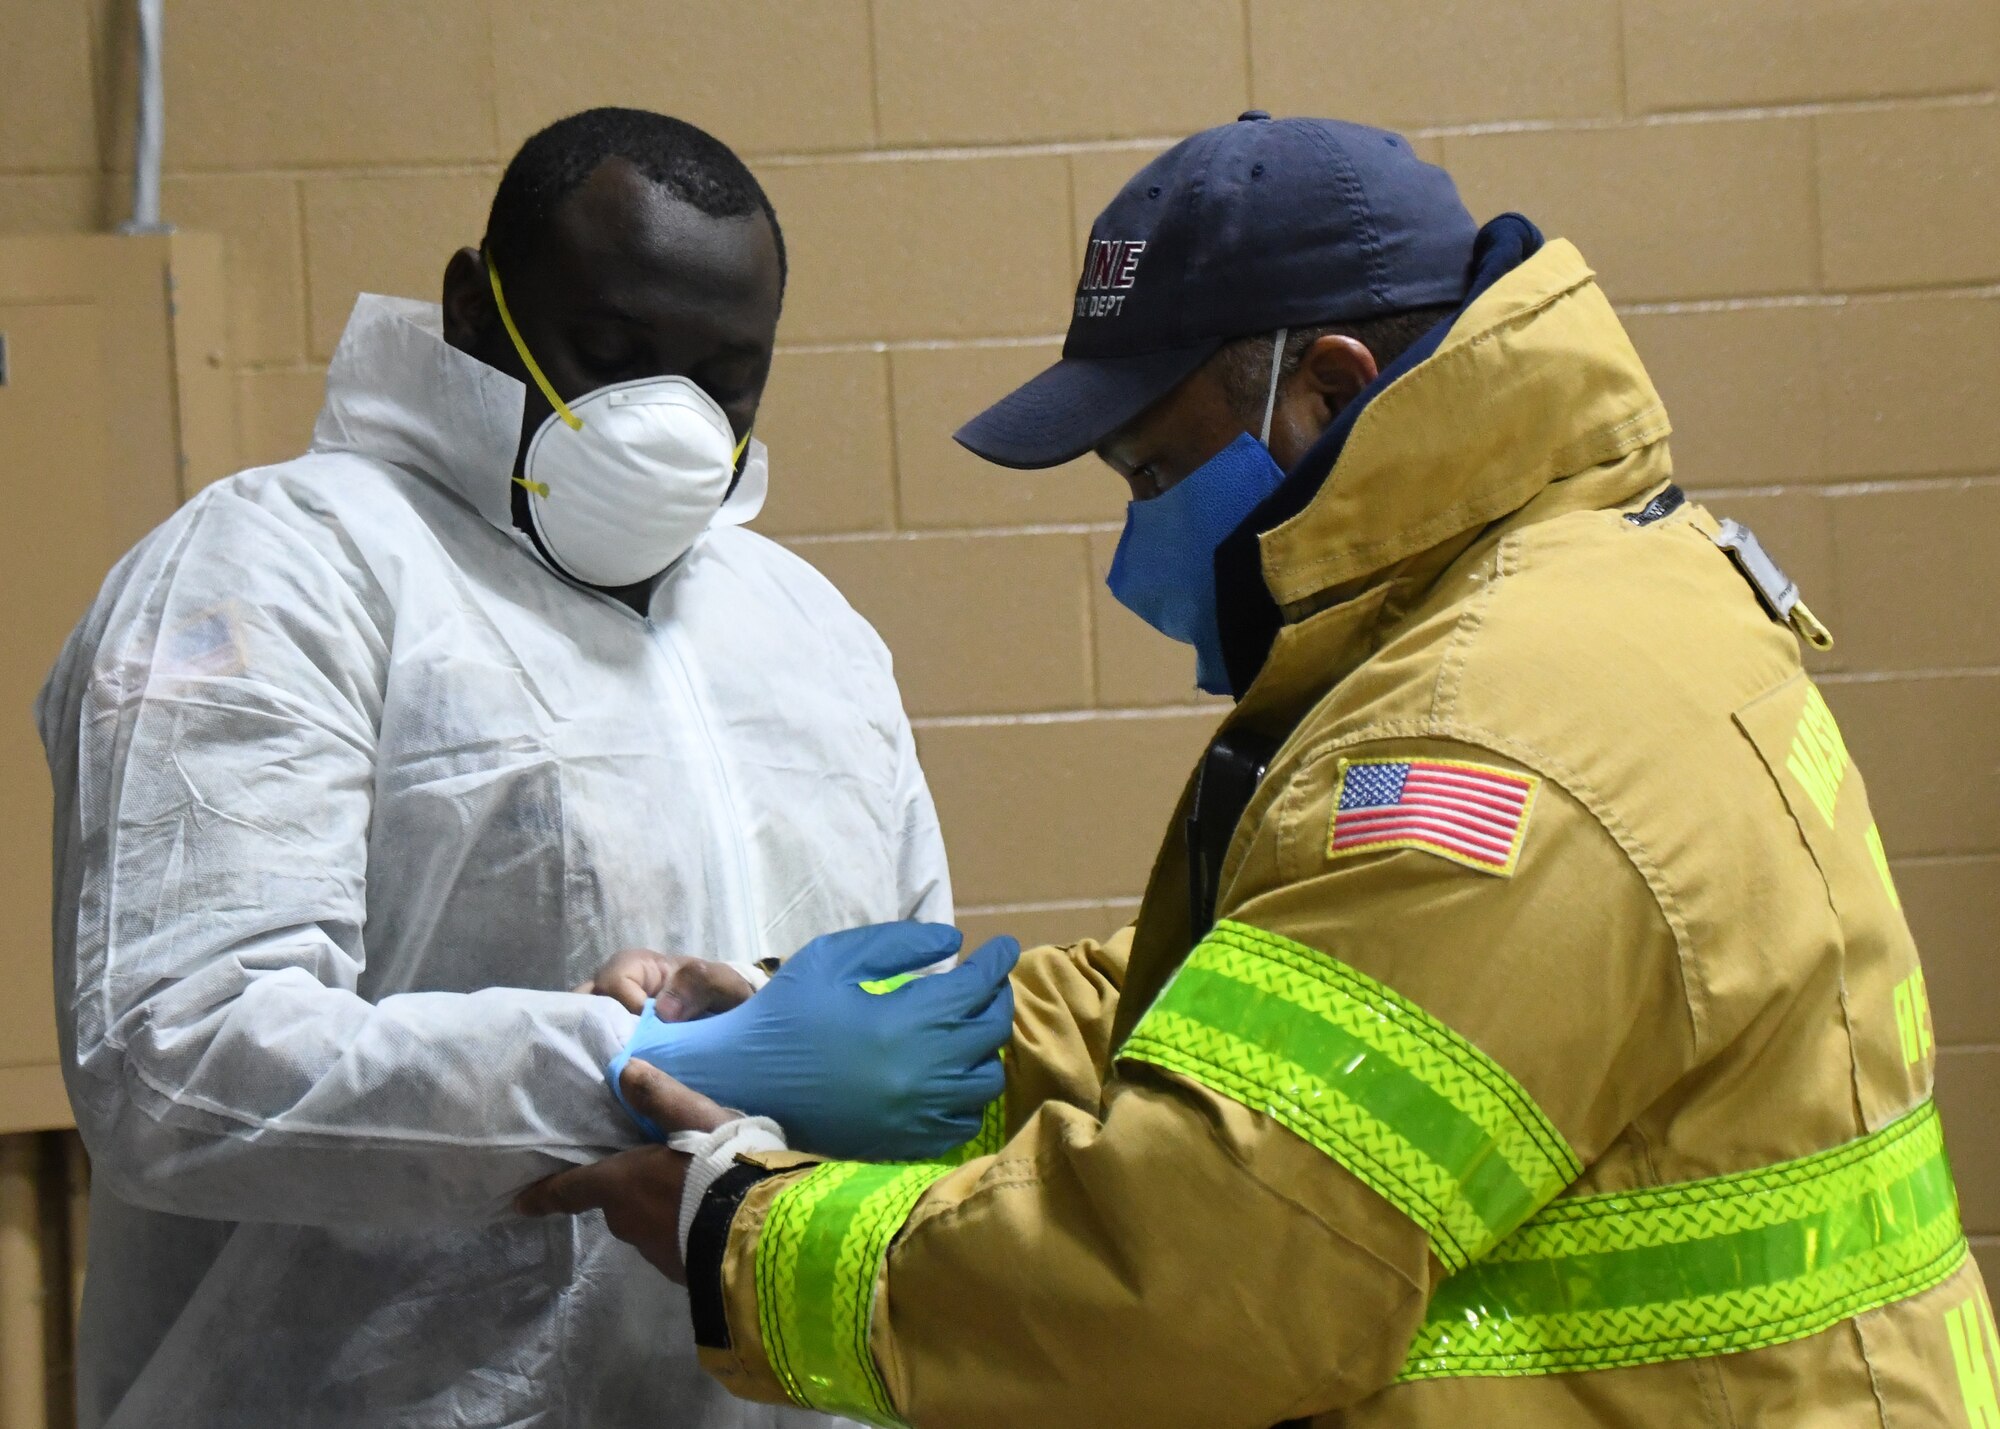 State Hazmat technicians help Soldiers from the 26th Maneuver Enhancement Brigade Headquarters and Headquarters Company and the 126th Aviation Battalion properly put on their Personal Protective Equipment before helping to administer COVID-19 tests to first responders at a drive thru testing facility, April 9, 2020, on the Big E fairgrounds in West Springfield, Massachusetts. The soldiers worked with other Massachusetts agencies getting individuals tested. The tested individuals should have their results digitally within 48 hours. (U.S. Air National Guard photo by Airman 1st Class Sara Kolinski)